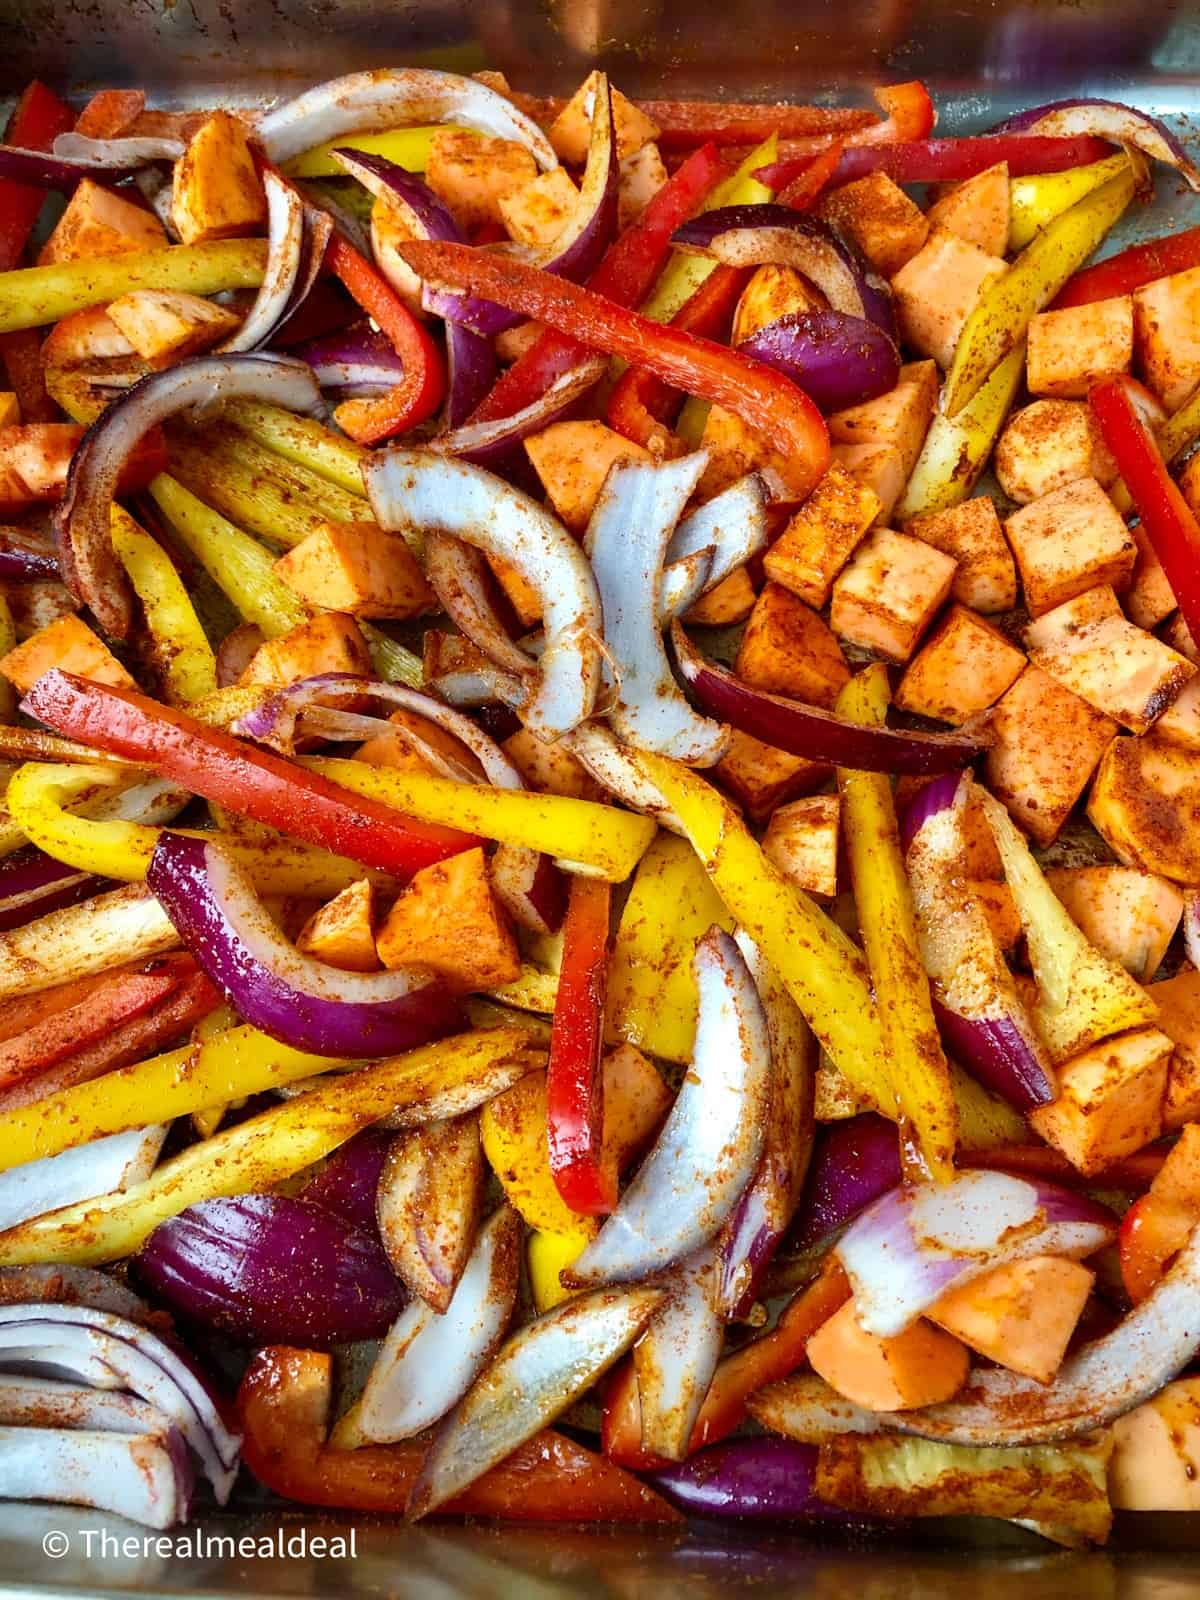 sliced red and yellow peppers red onion diced sweet potato coated in spice mix in roasting tray